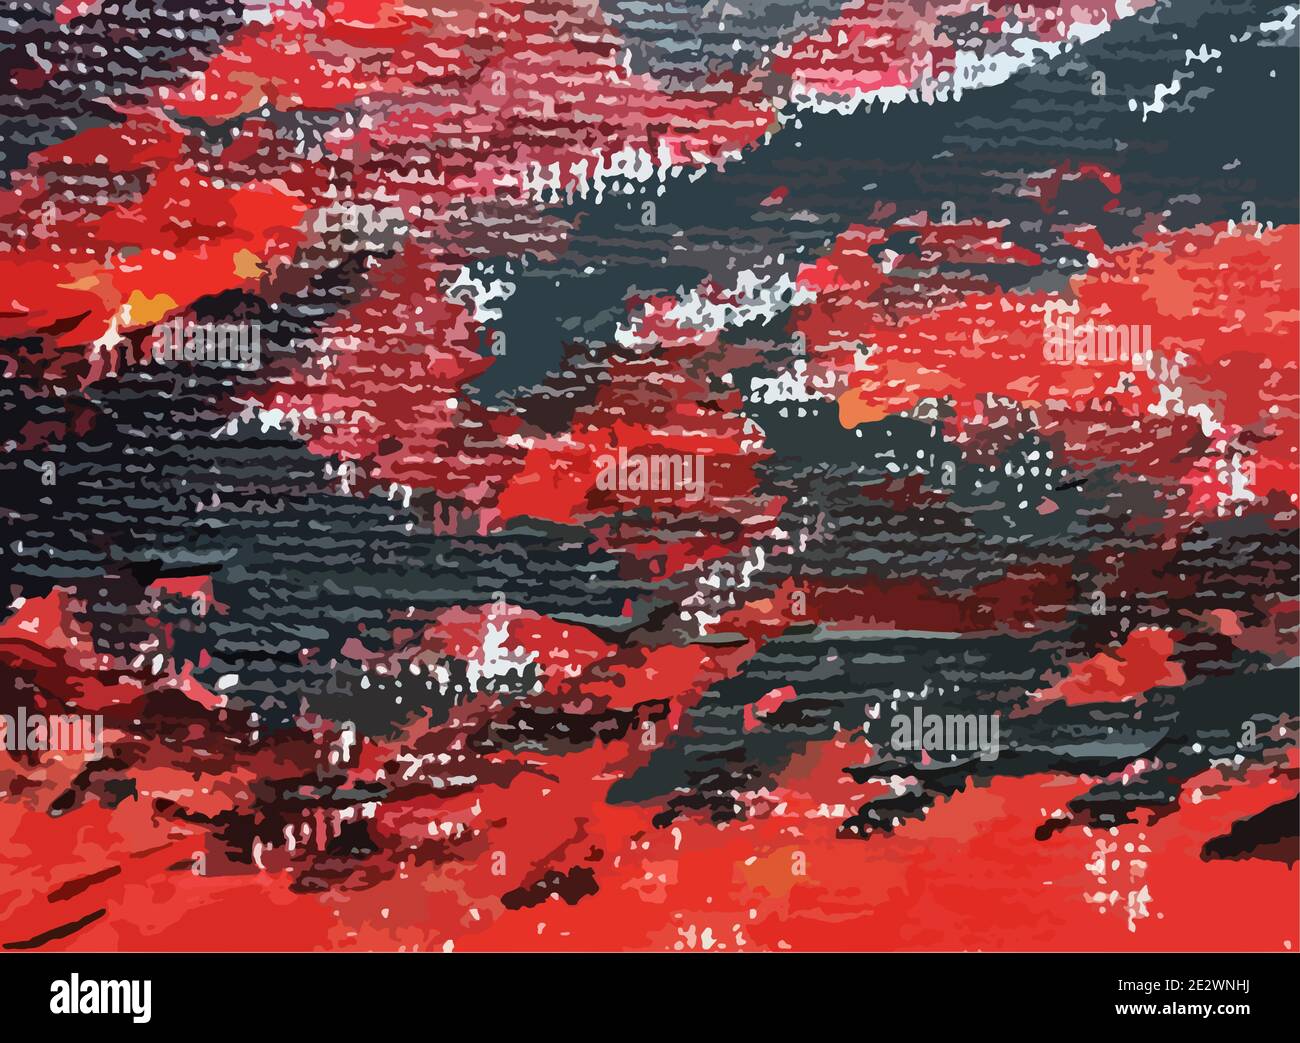 Grunge red and black background, brush strokes on canvas. Vector illustration Stock Vector